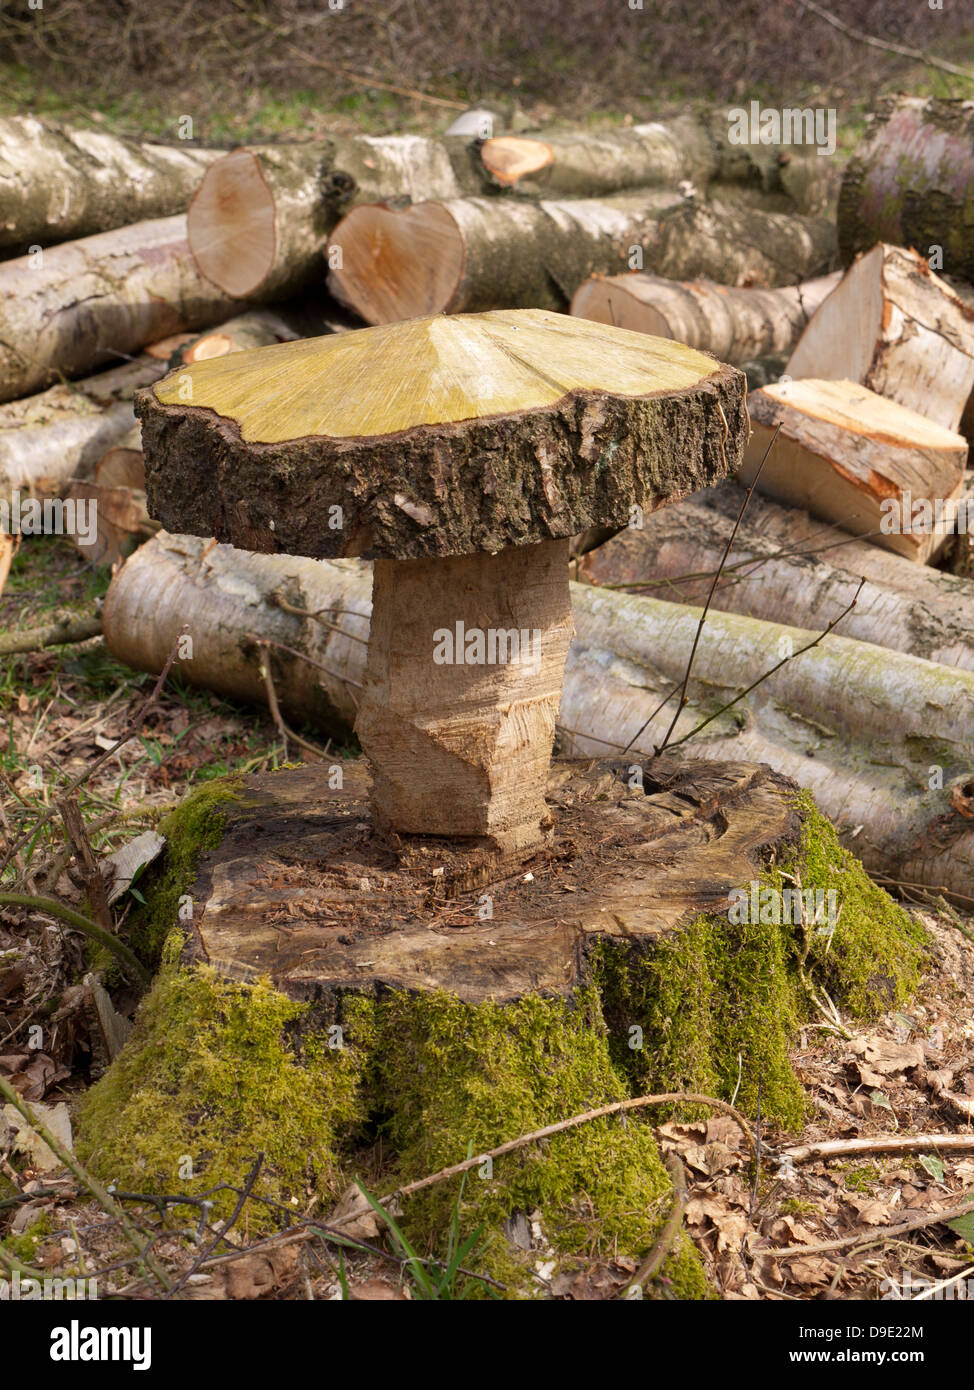 Uk, Cheshire, pile of freshly harvested timber and sculpture Stock Photo